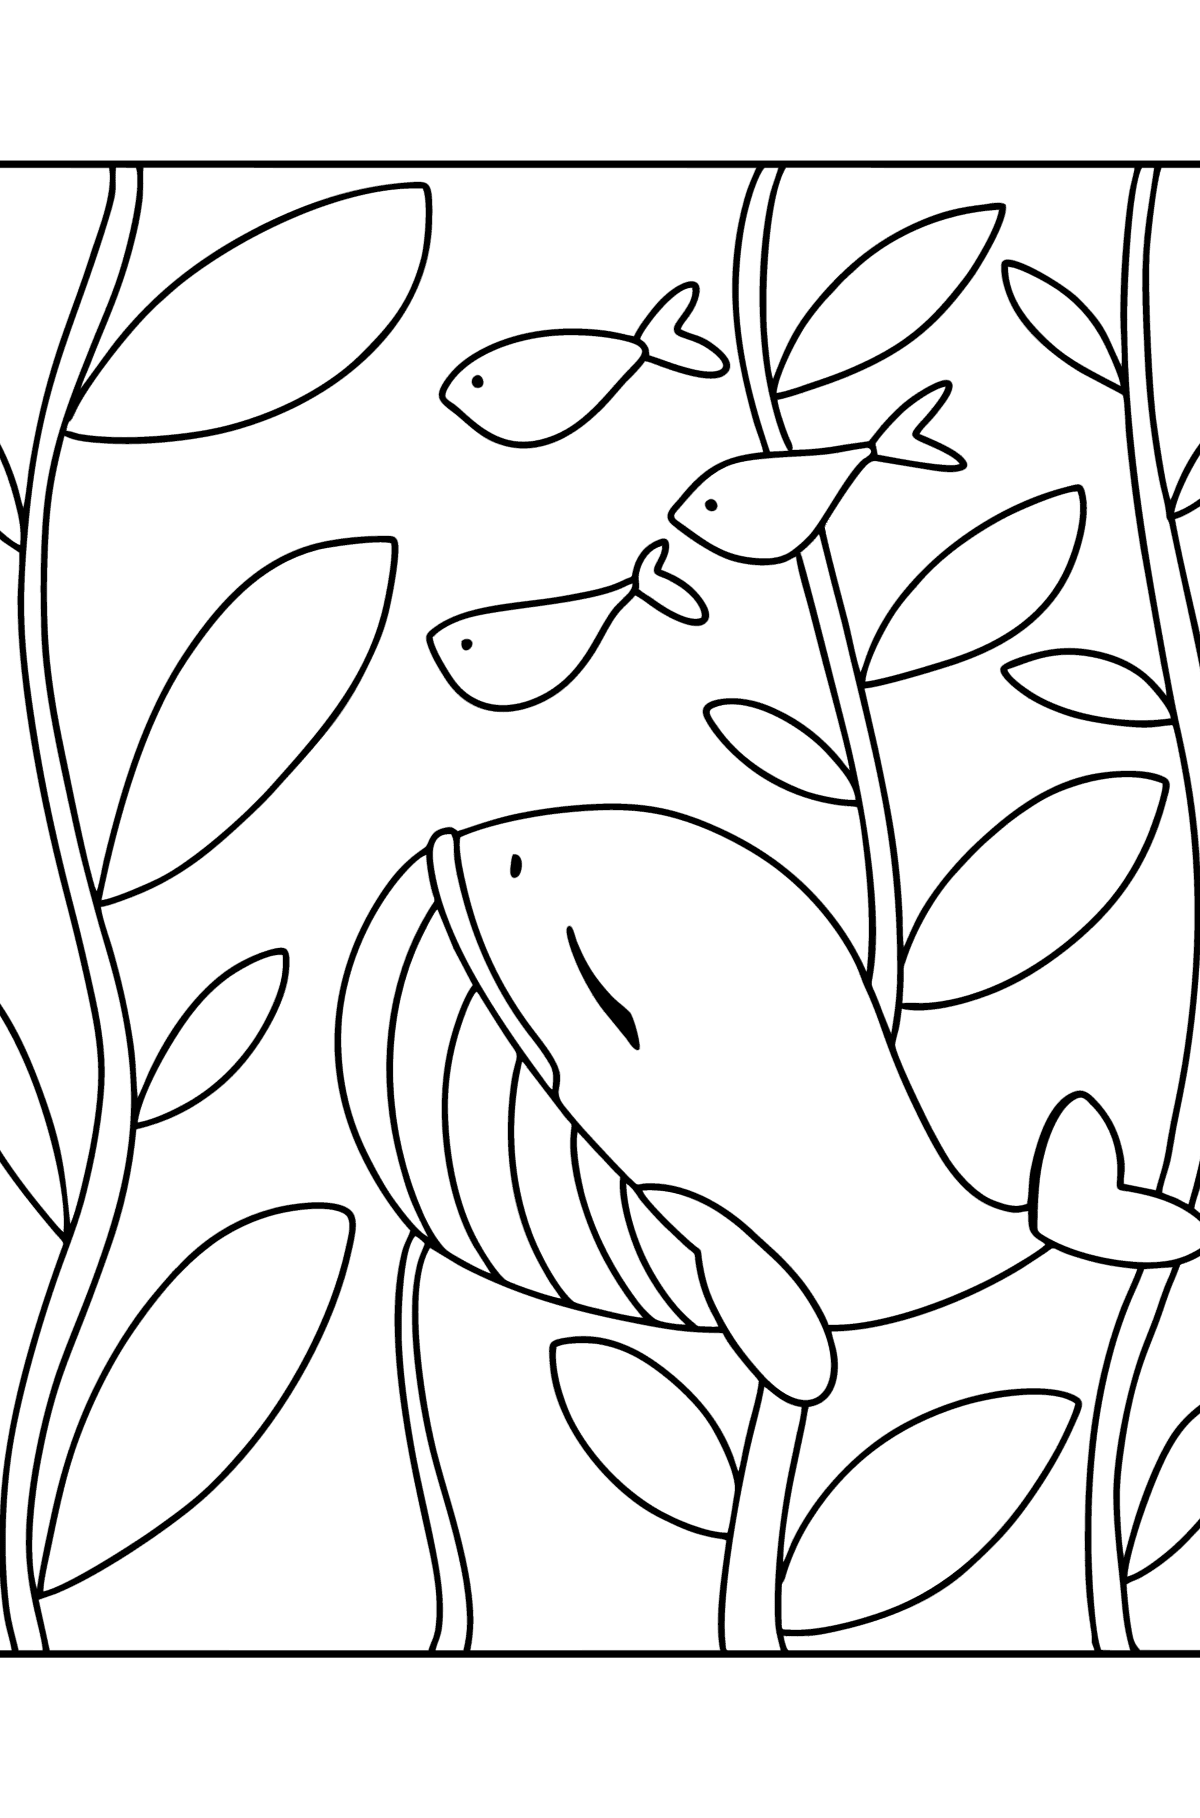 Whale baby coloring page - Coloring Pages for Kids